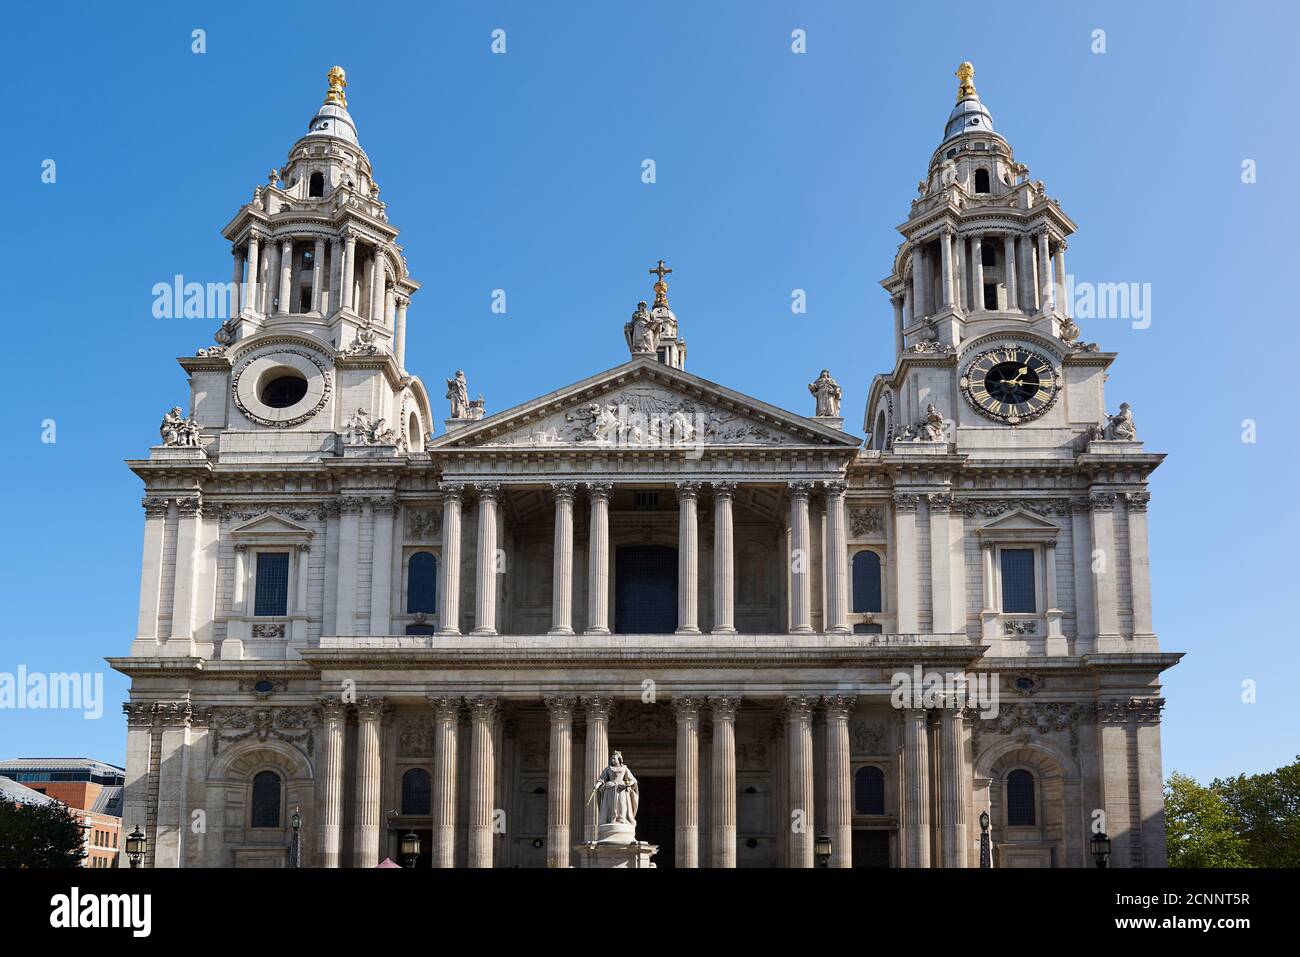 The west front of St Paul's Cathedral in the City of London, UK Stock Photo